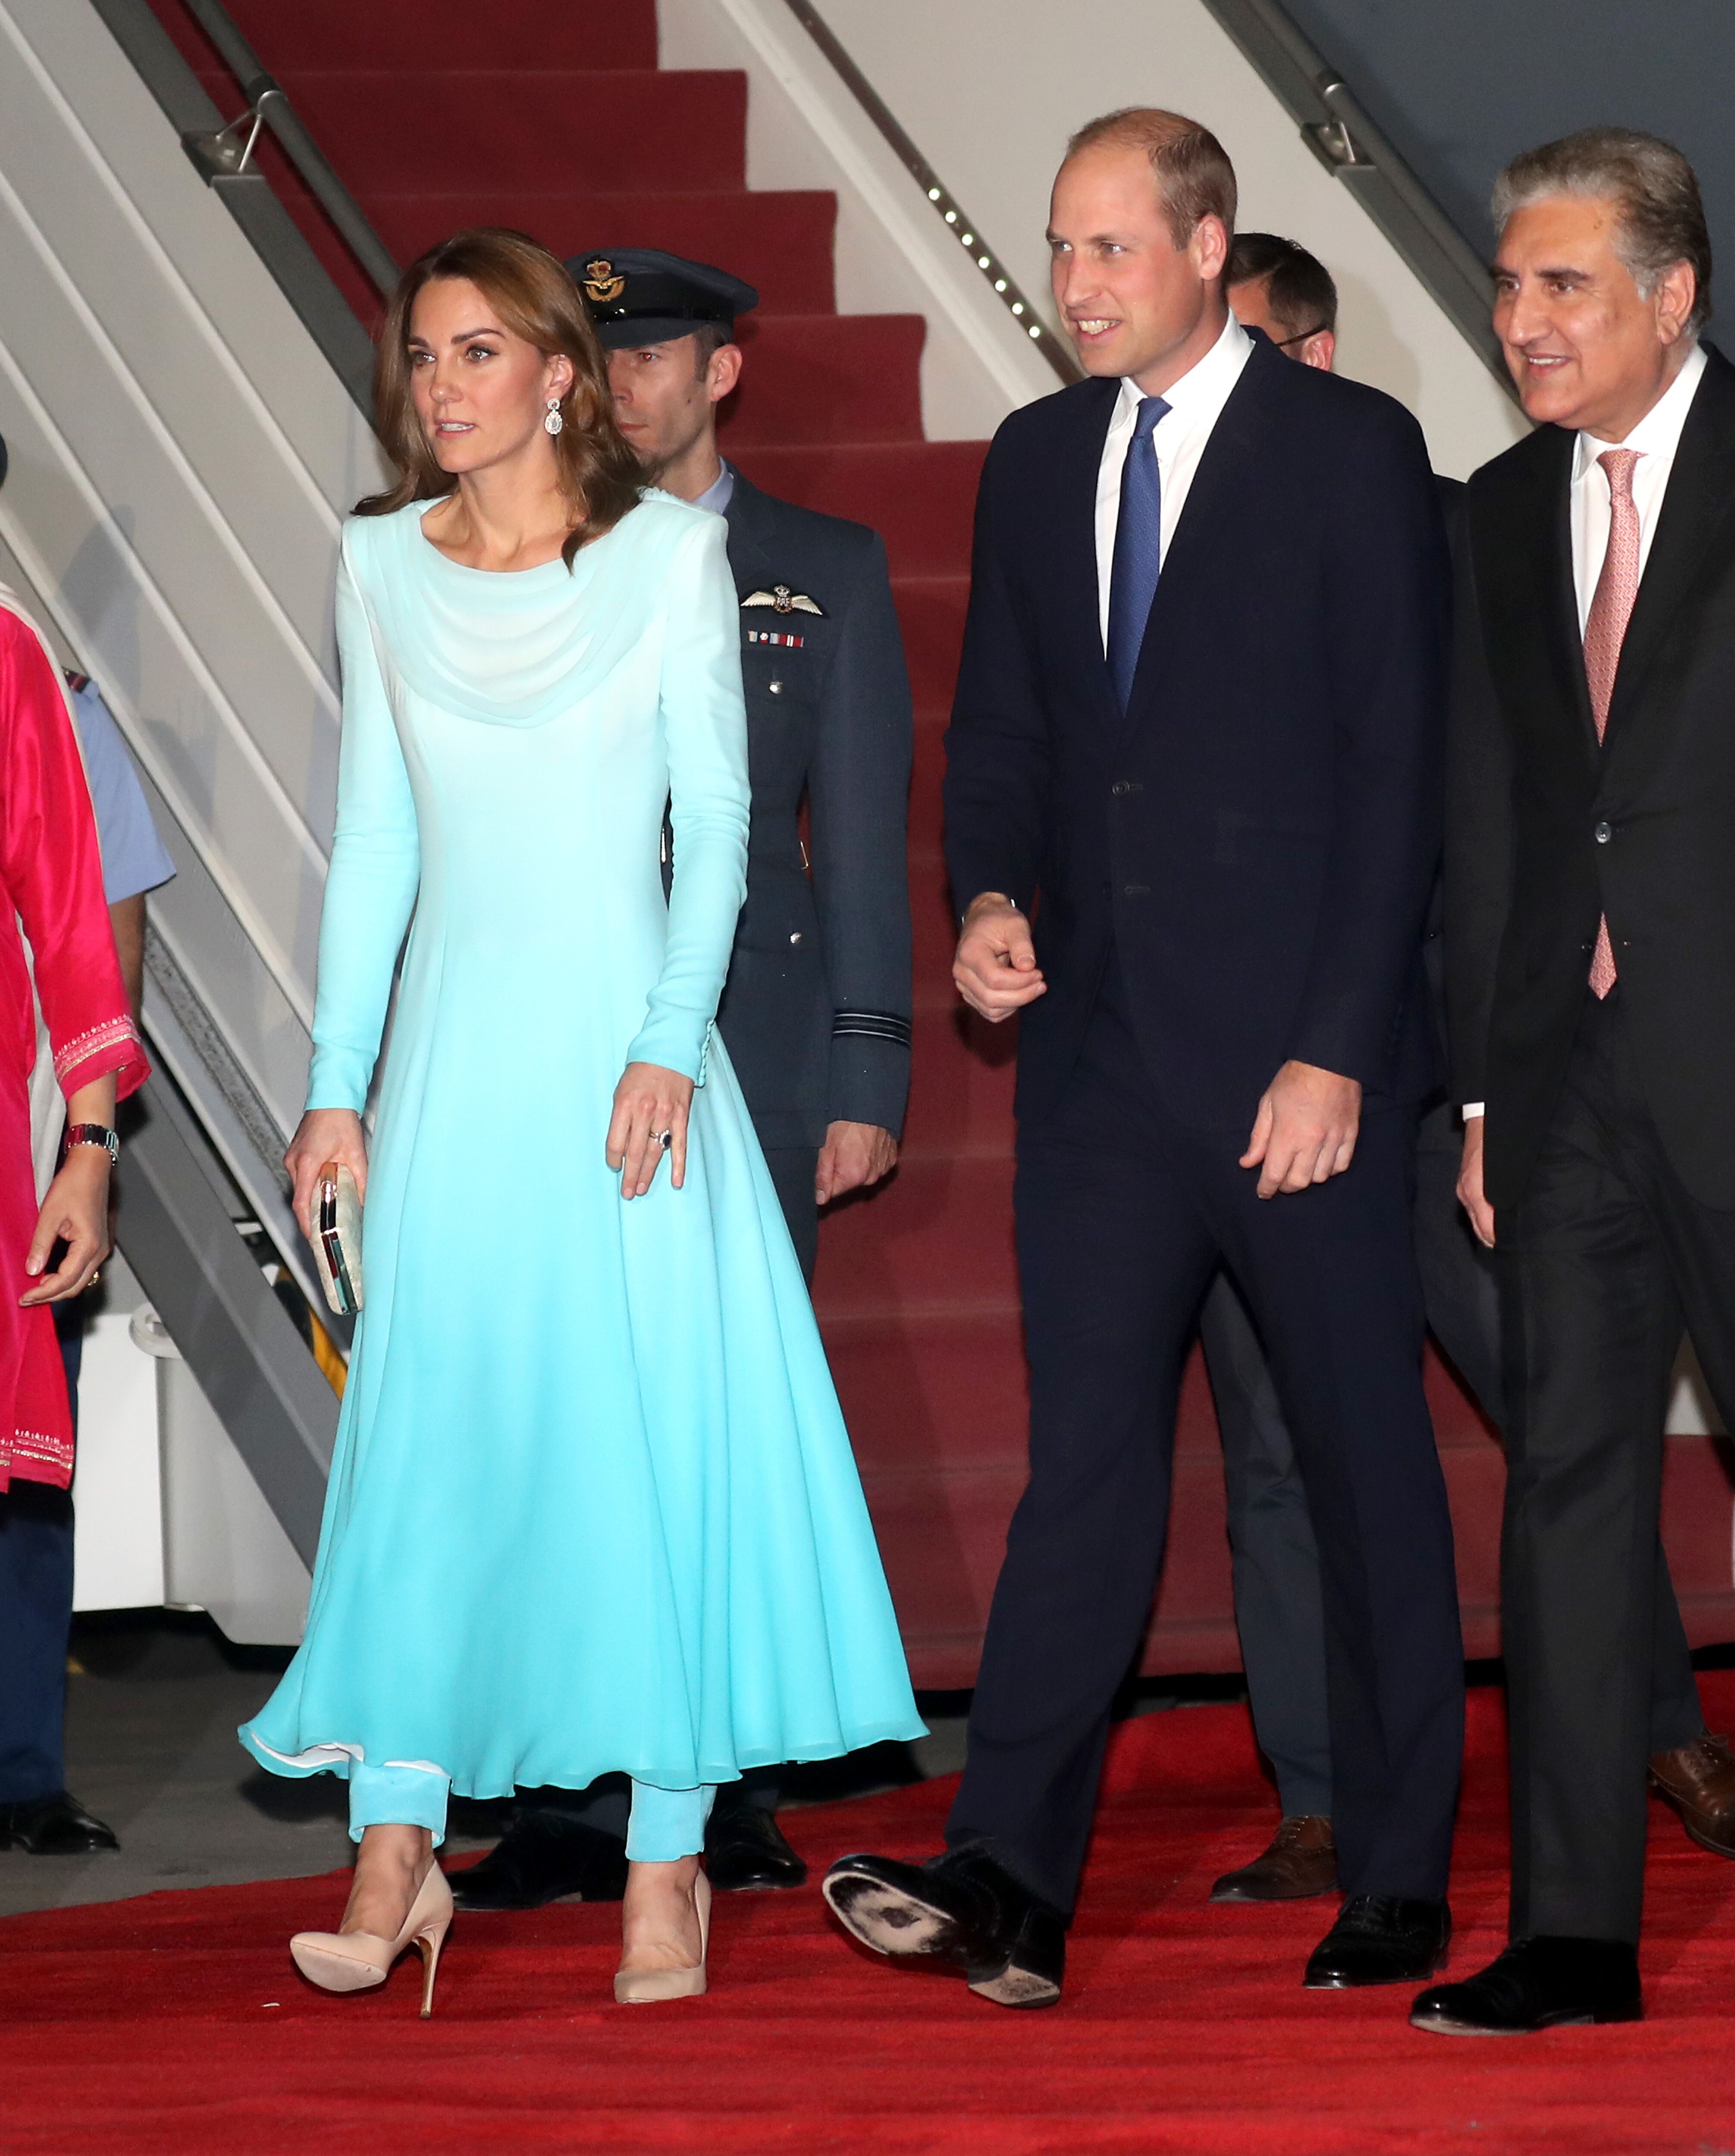 Duchess of Cambridge and Prince William, Duke of Cambridge arrive at Kur Khan airbase ahead of their royal tour of Pakistan on October 14, 2019 in Rawalpindi, Pakistan | Photo: Getty Images